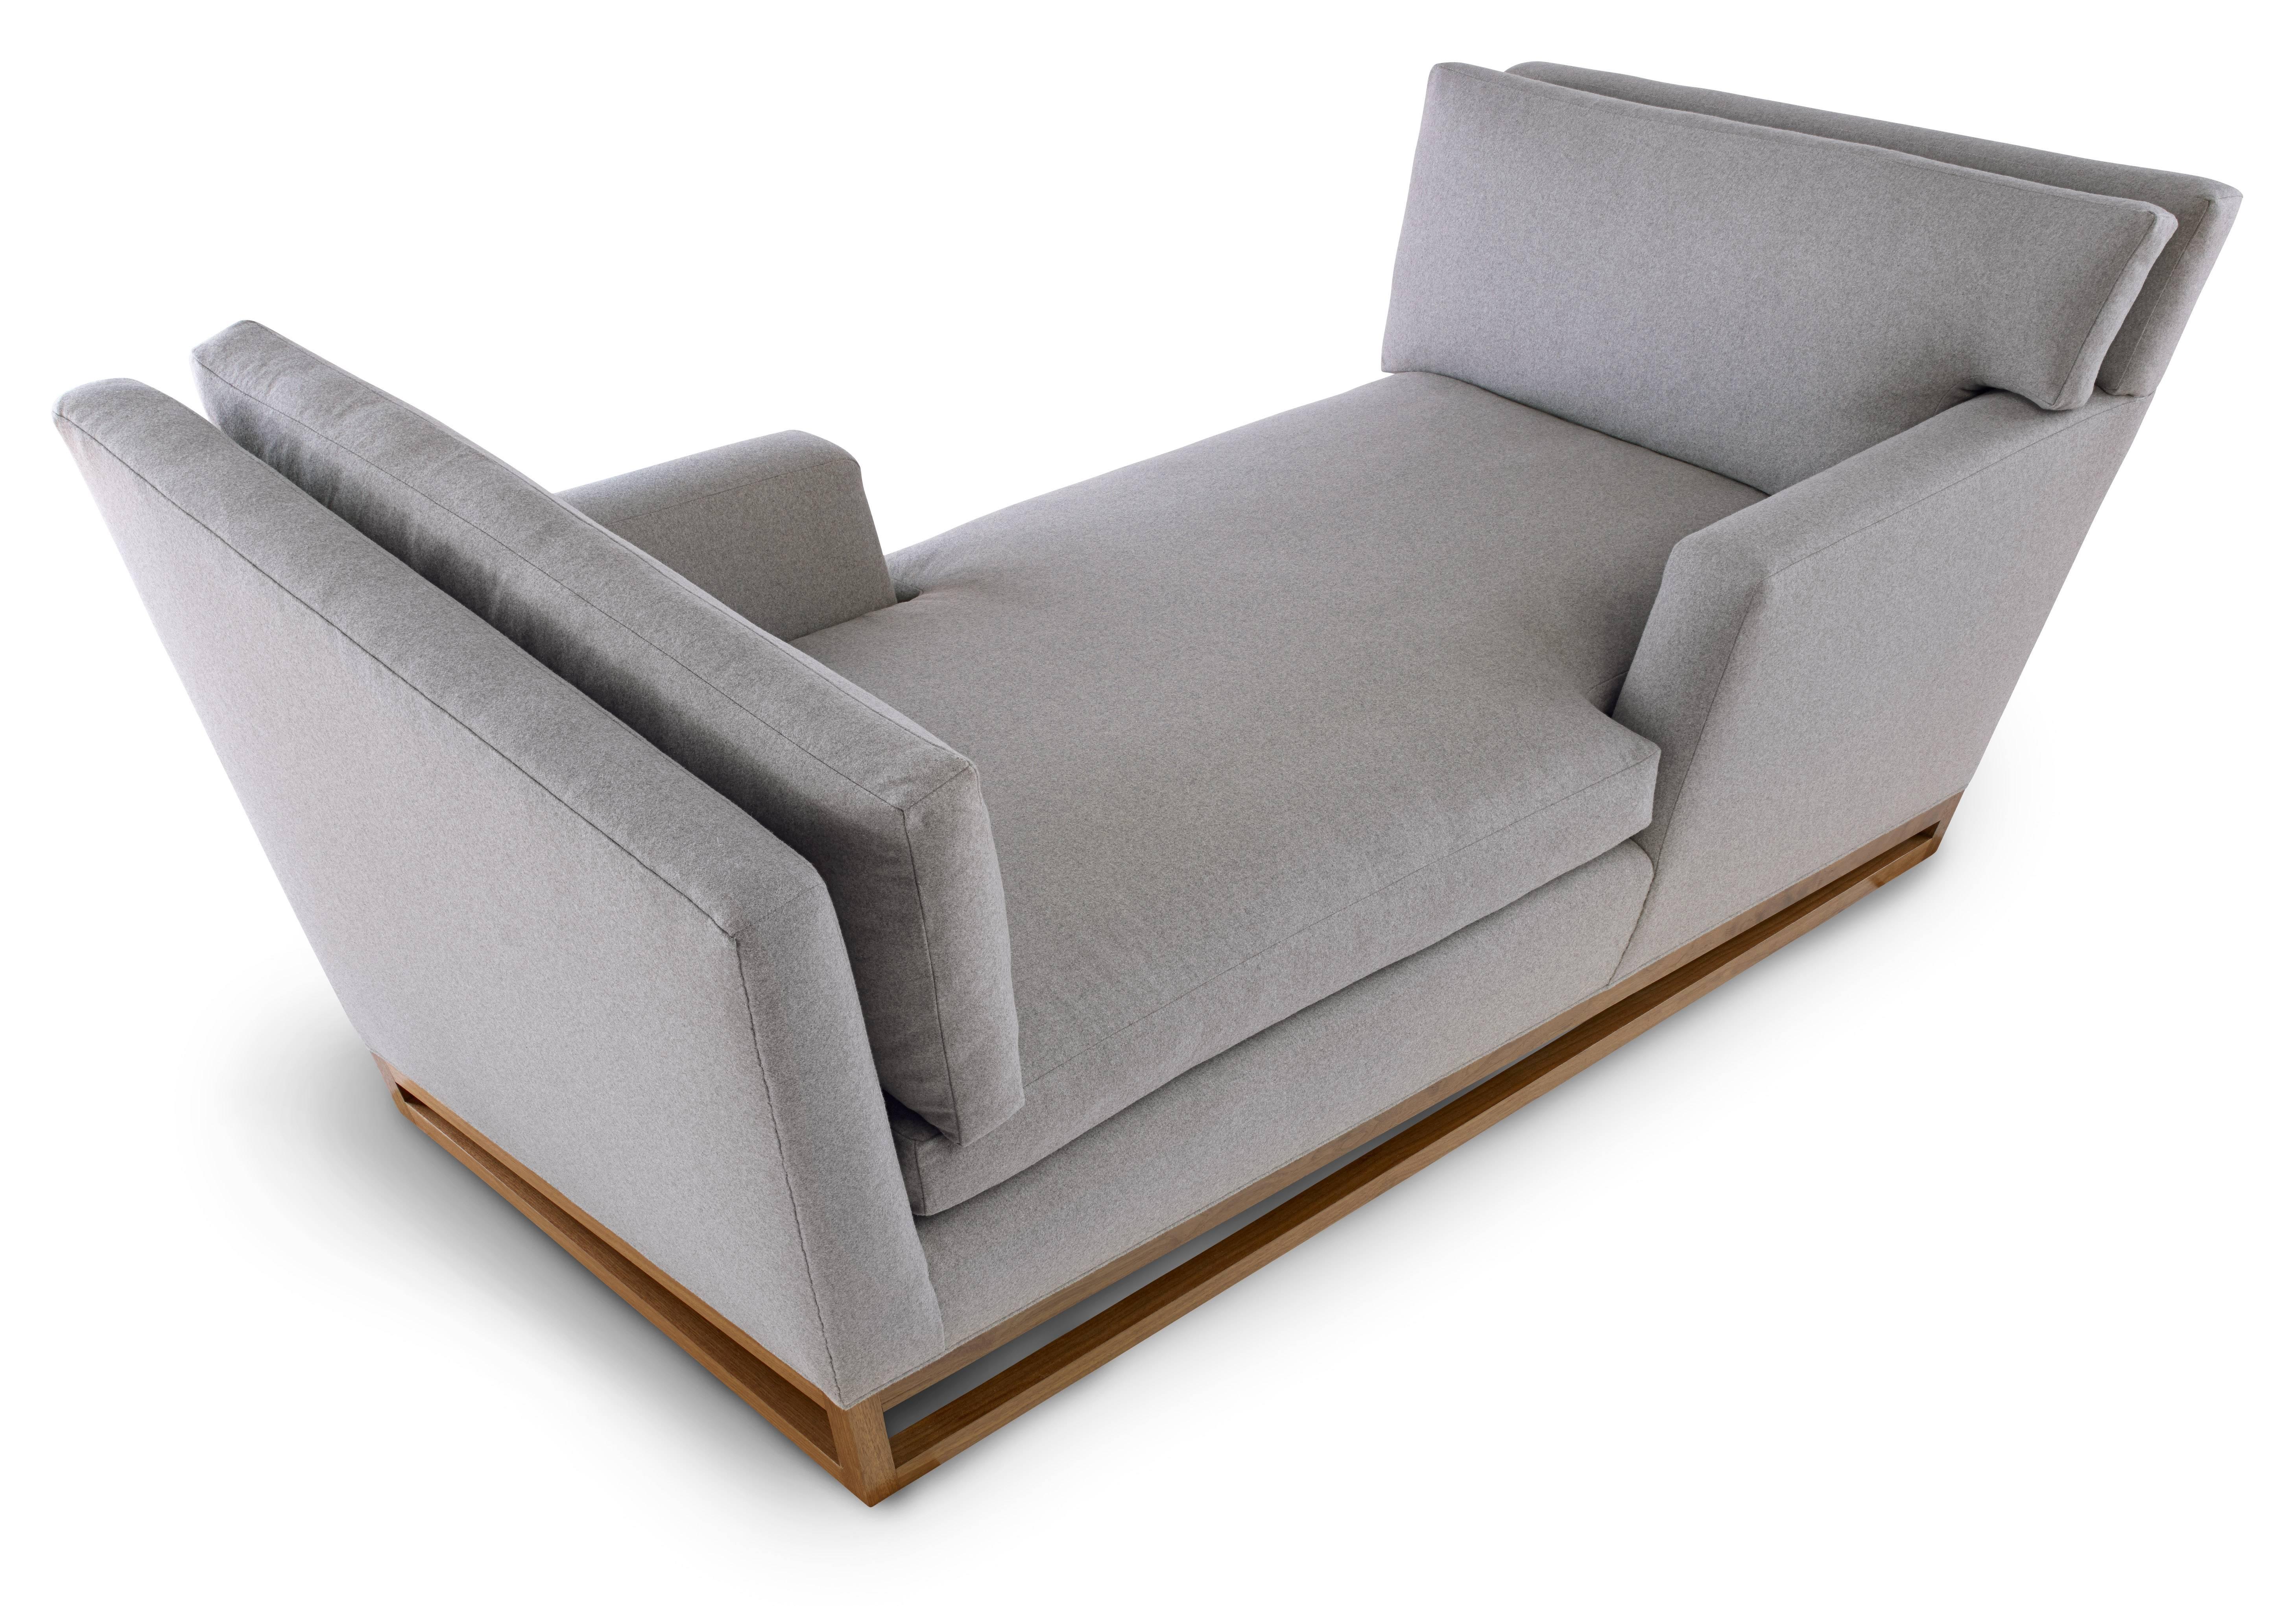 This handmade, contemporary Angle Base Tête-A-Tête sofa is sure to be the centrepiece of any room. The unique angular base of this all-original design sets off the angular form vocabulary seen throughout. But don't let the hard angles fool you,